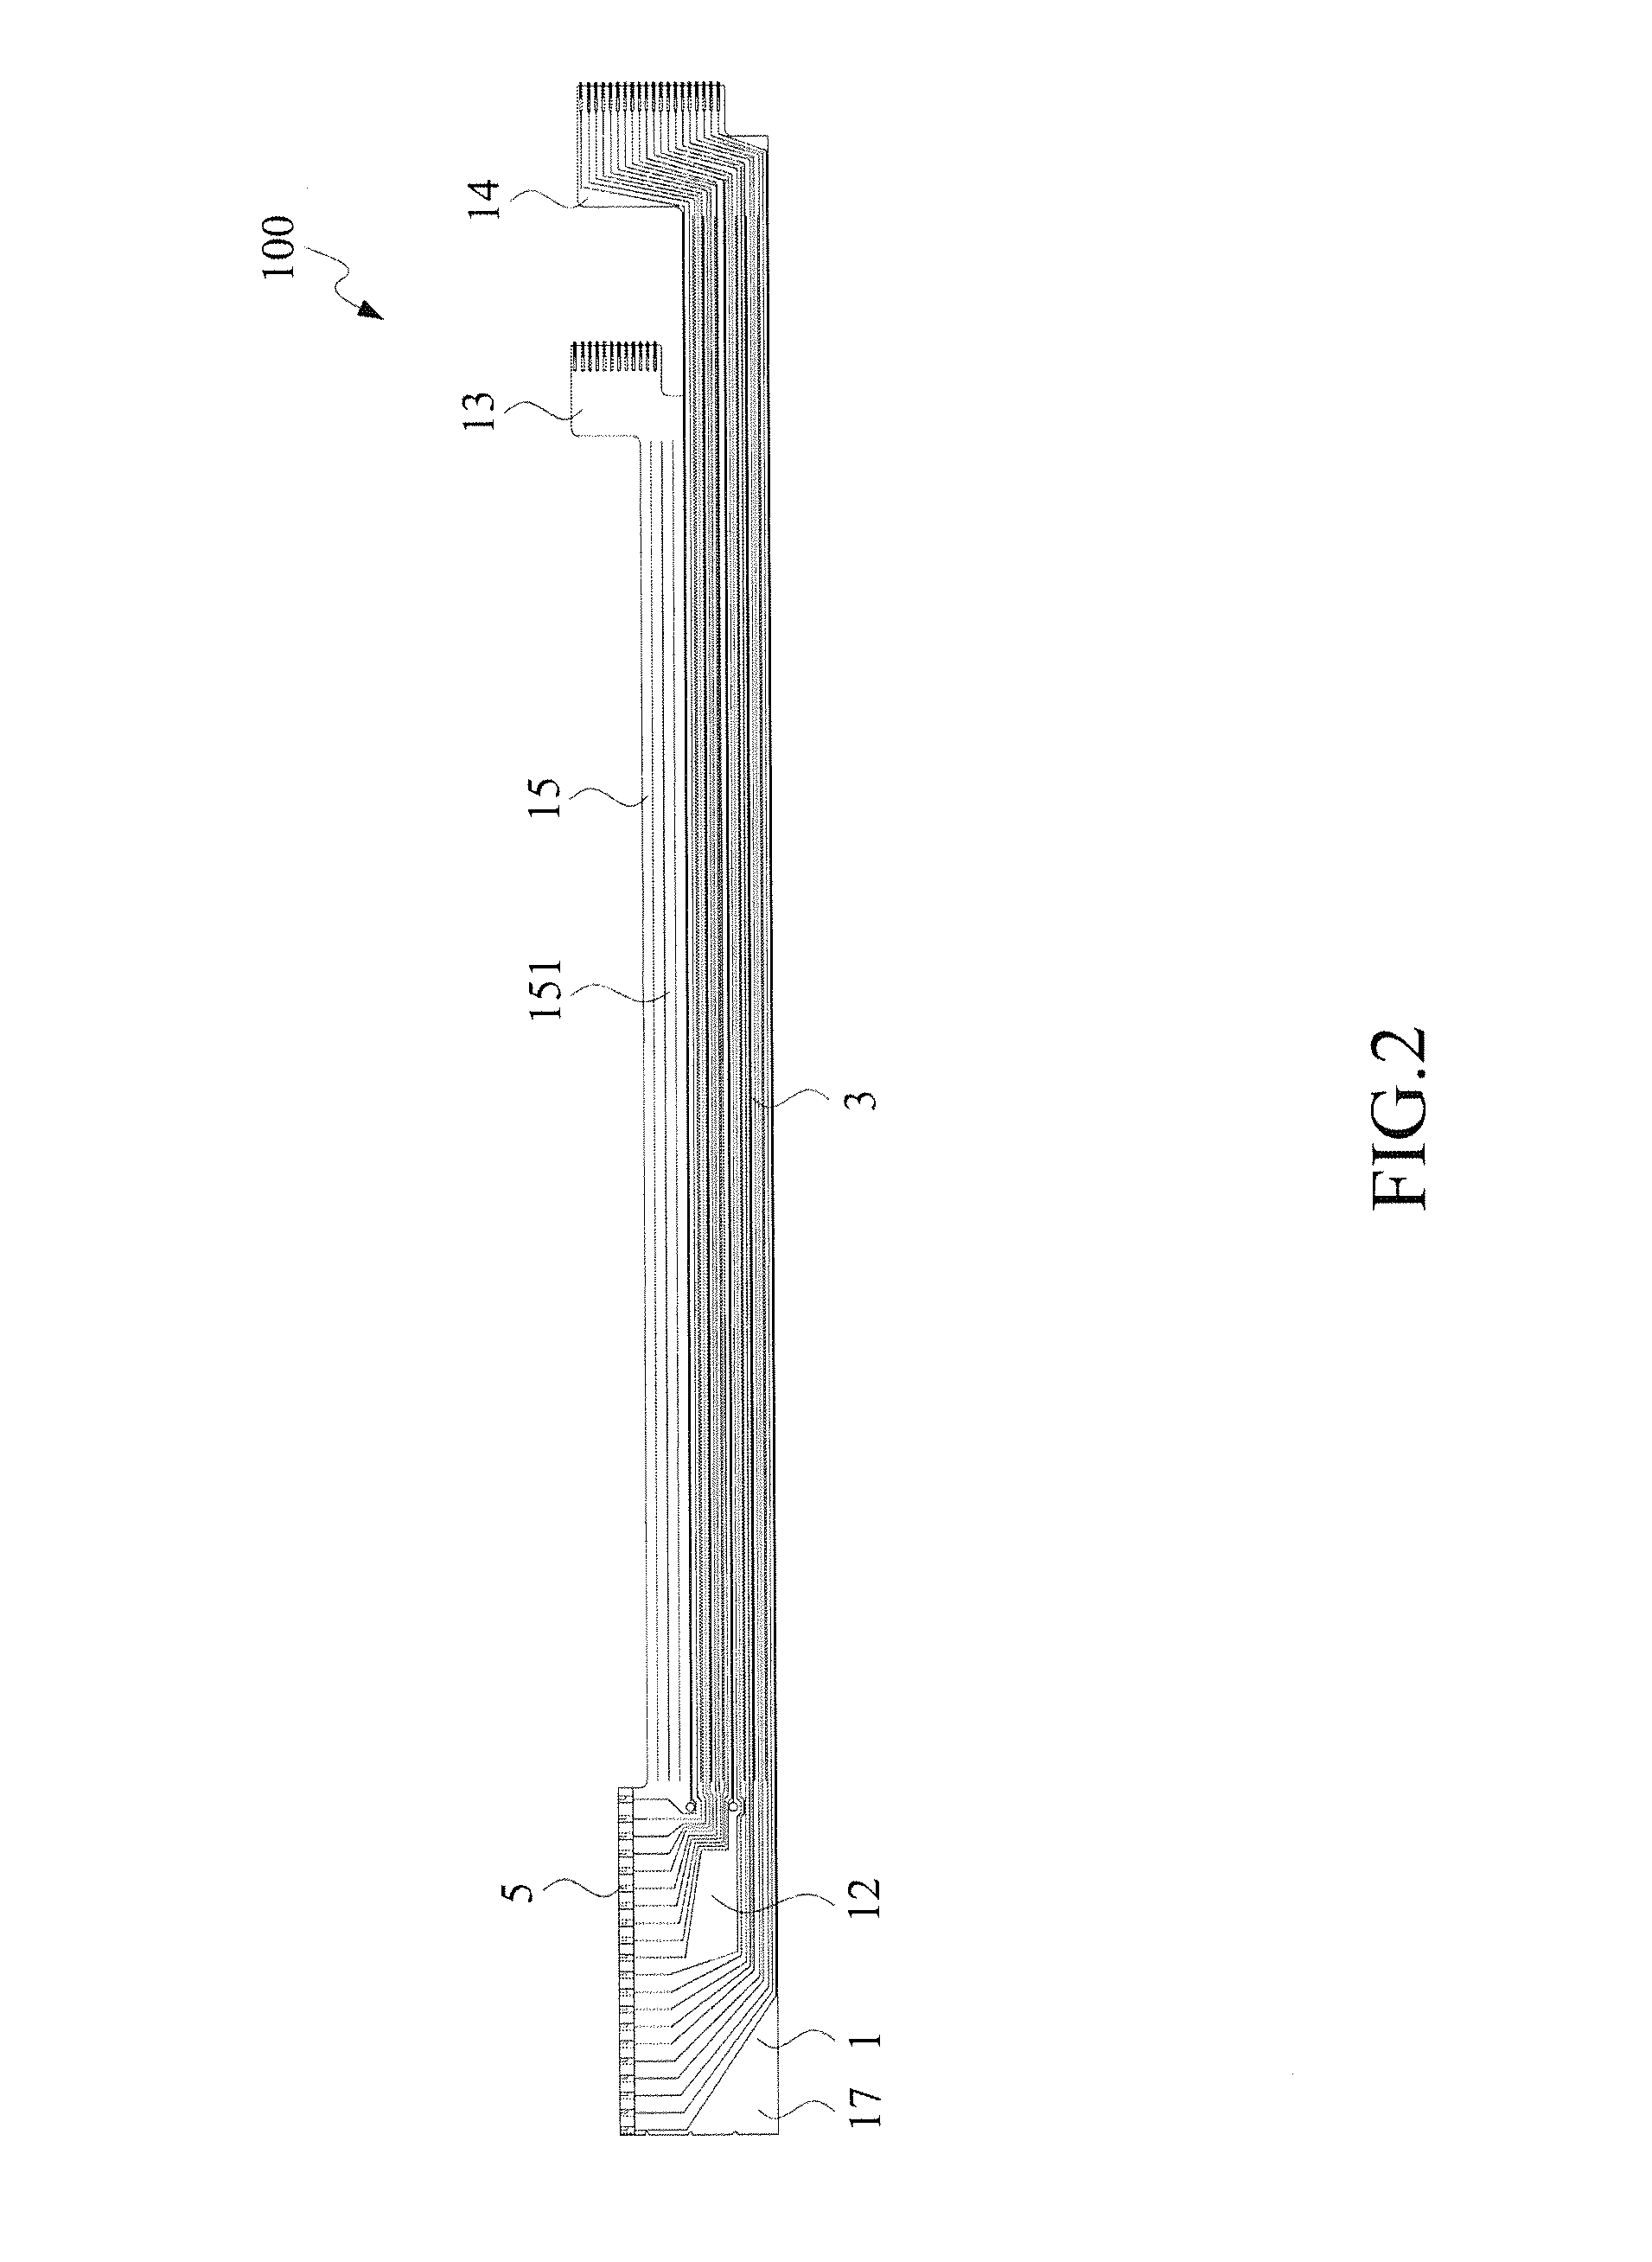 Double-side-conducting flexible-circuit flat cable with cluster section